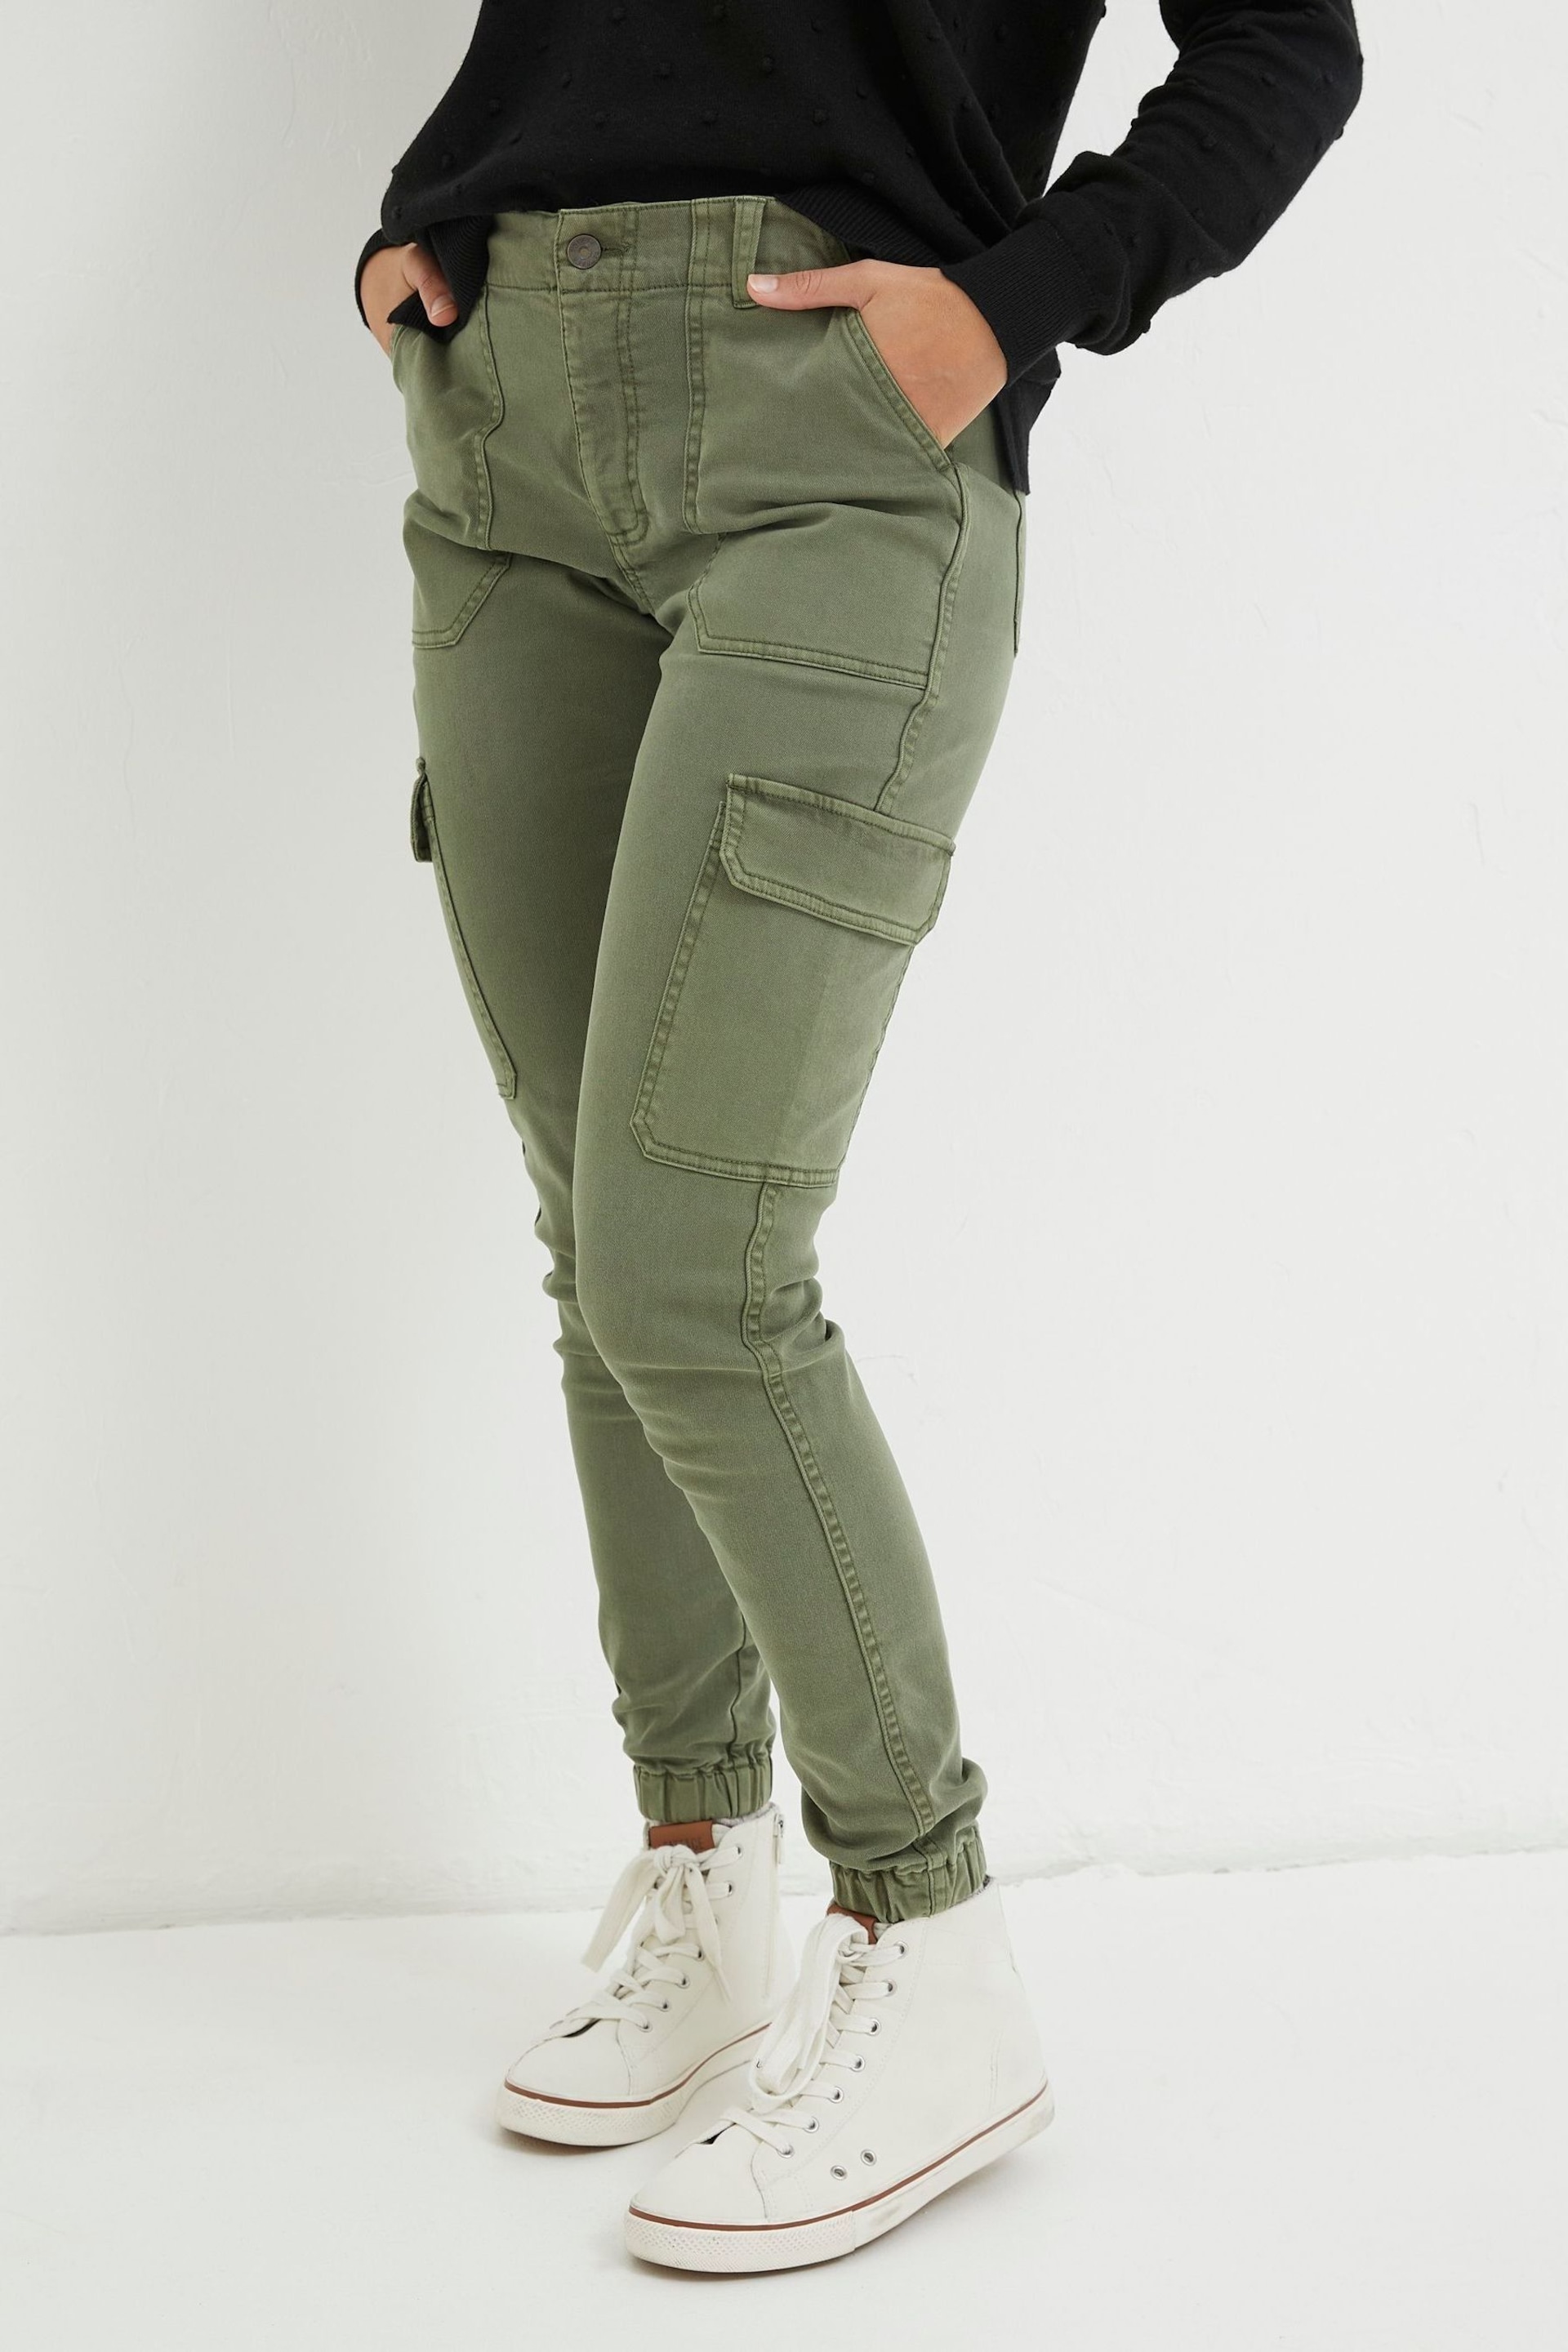 FatFace Green Hythe Cargo Trousers - Image 1 of 6